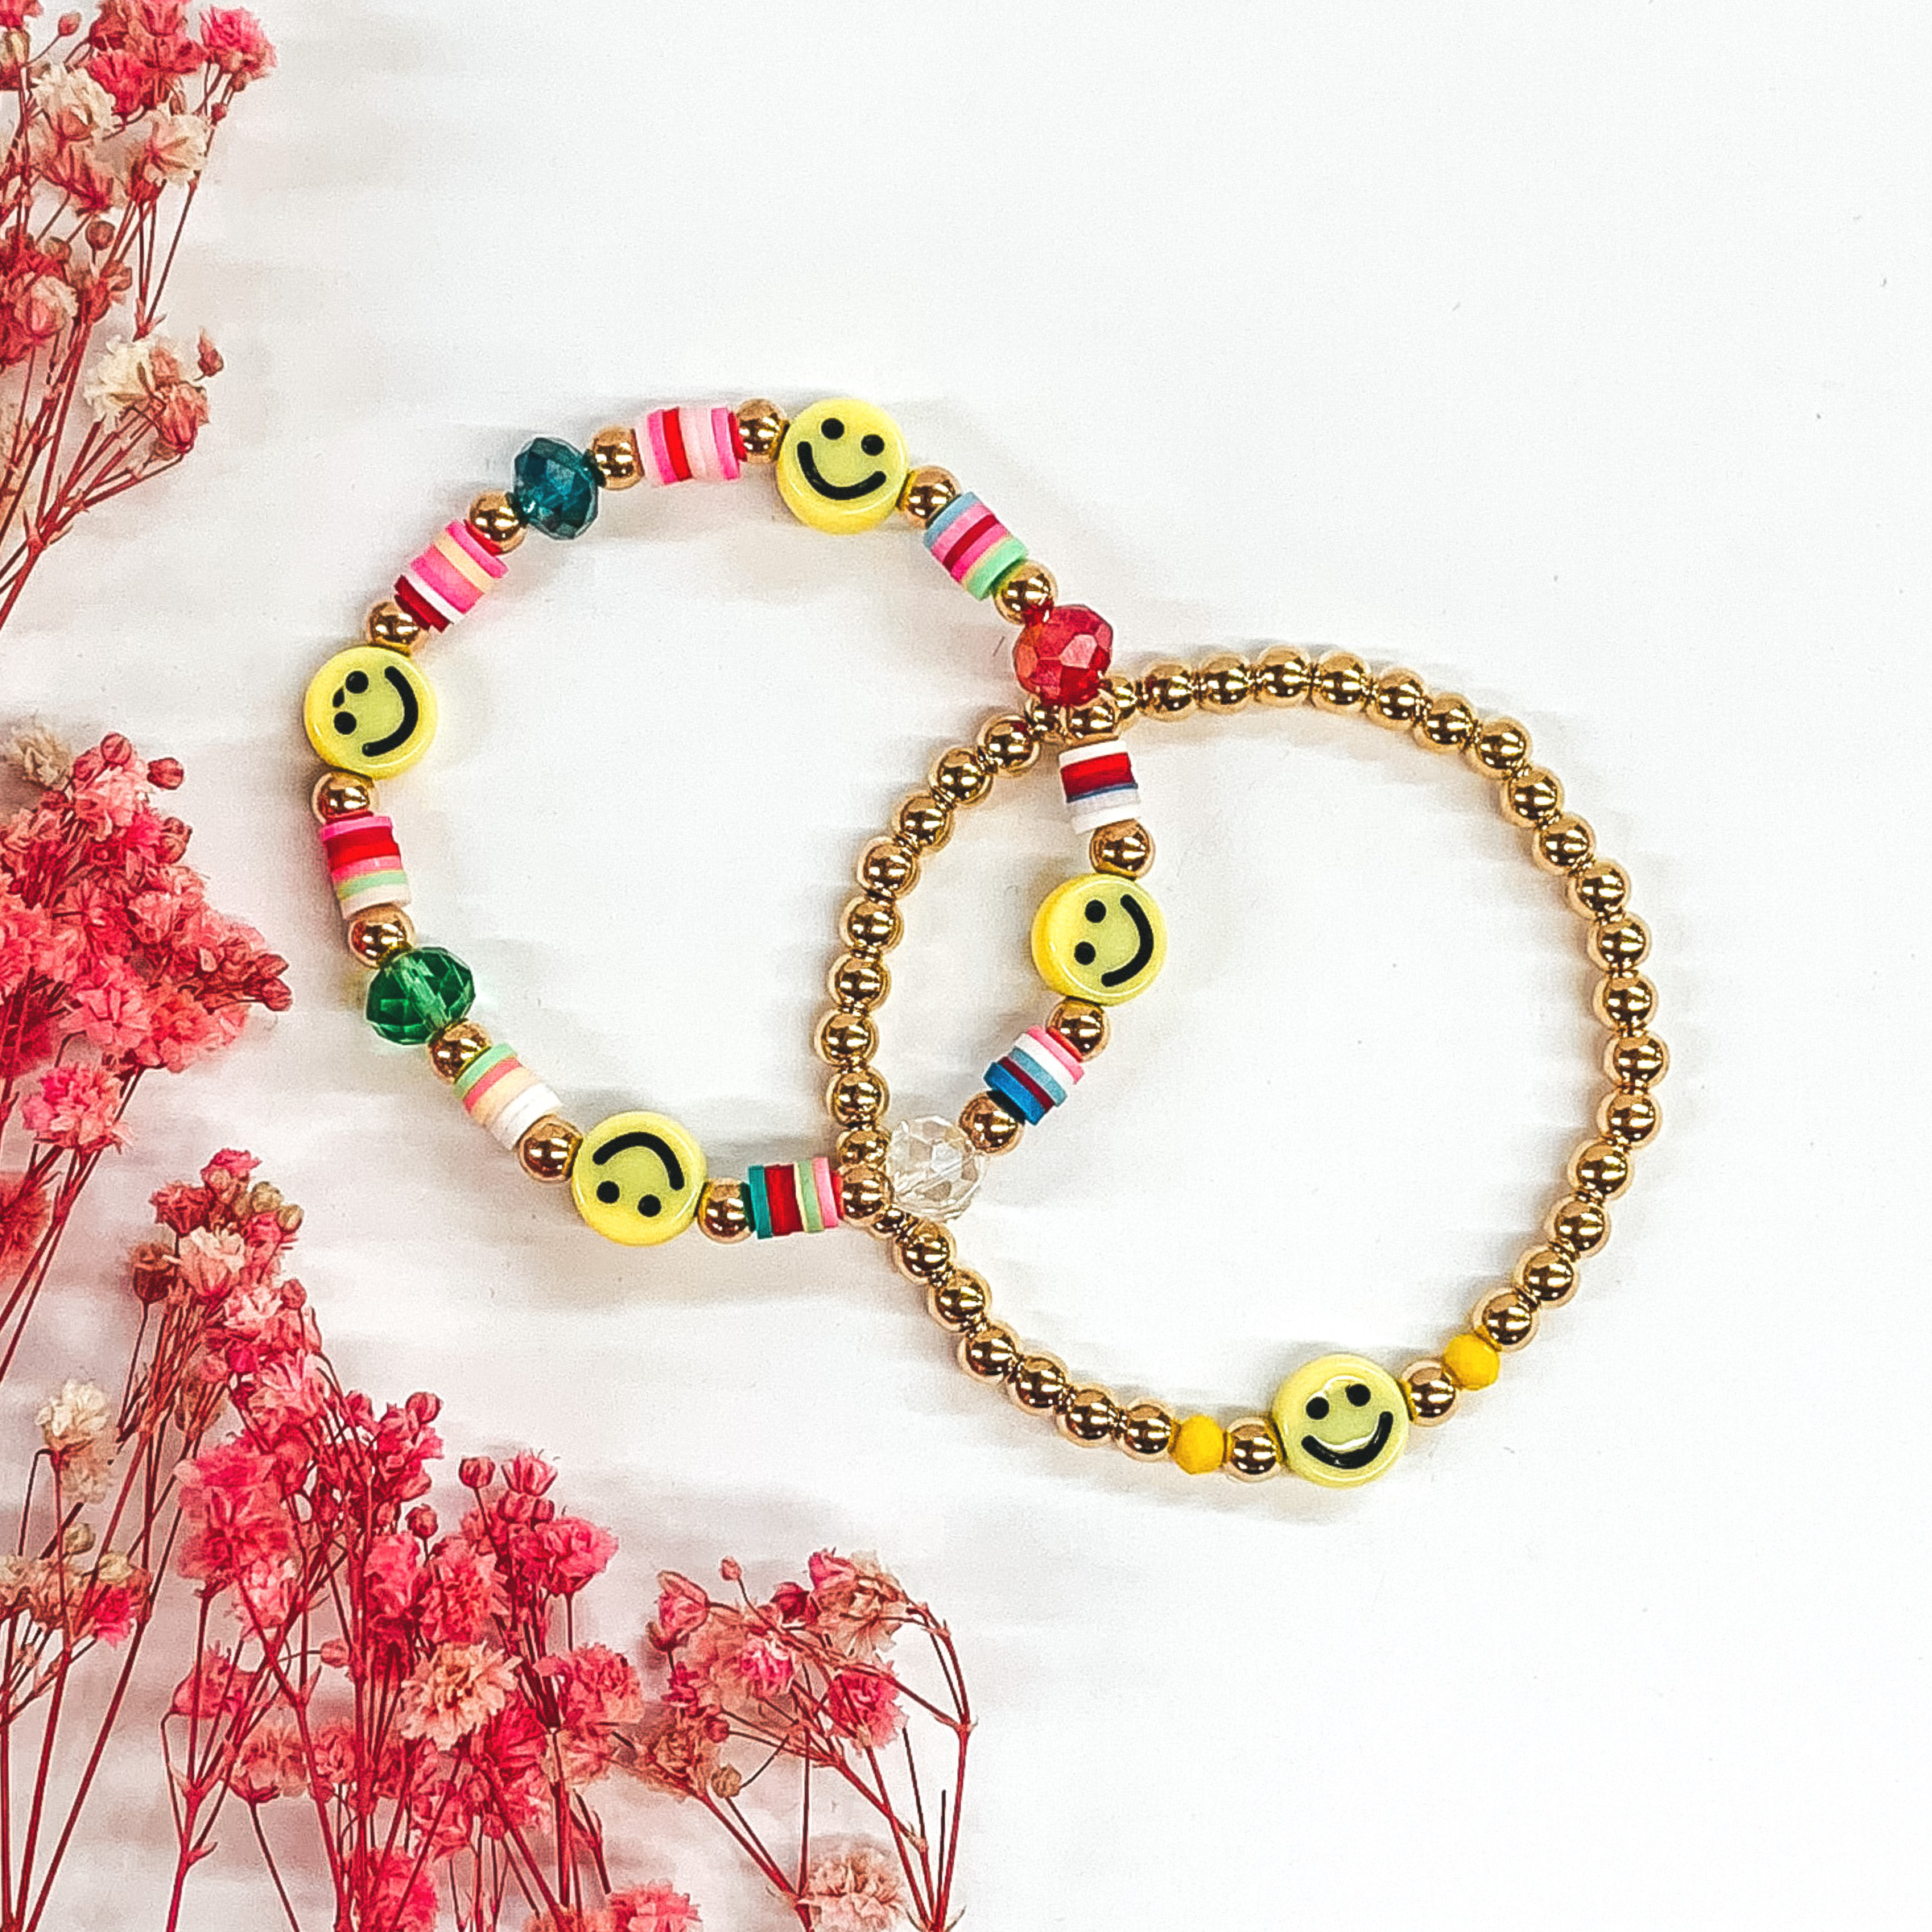 Bright Smiles Beaded Bracelet Set in Multicolored - Giddy Up Glamour Boutique